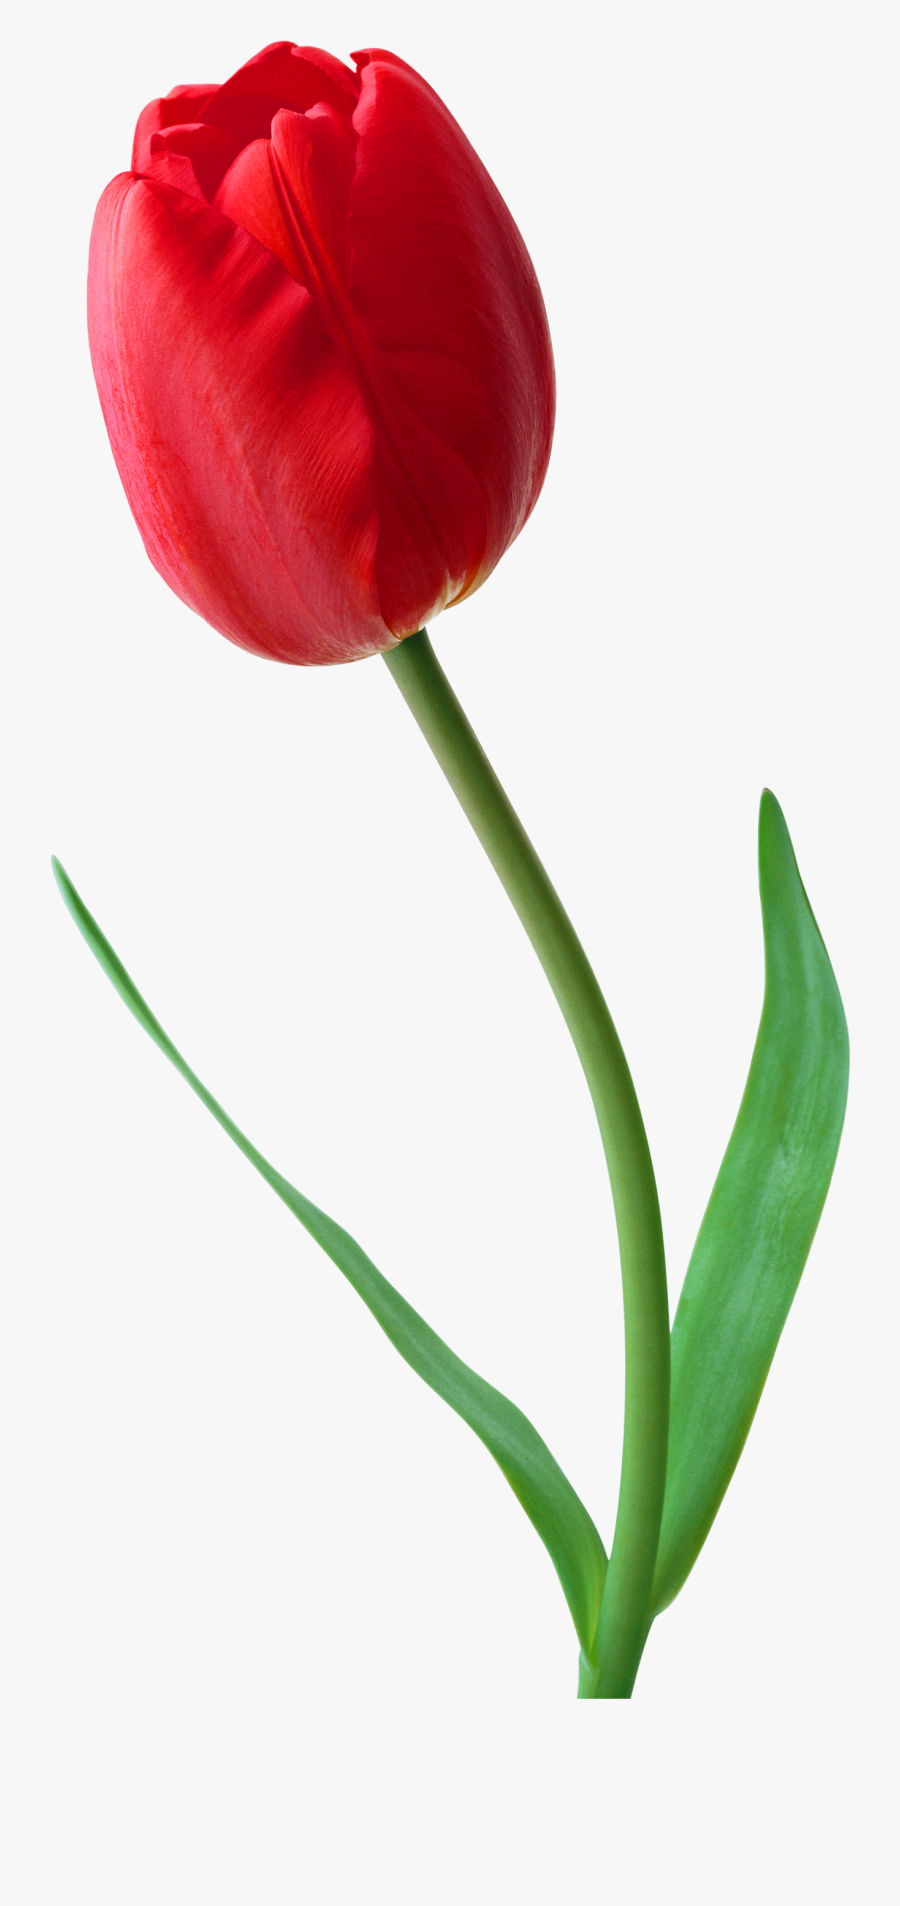 Red Tulip Flower Png, Transparent Clipart